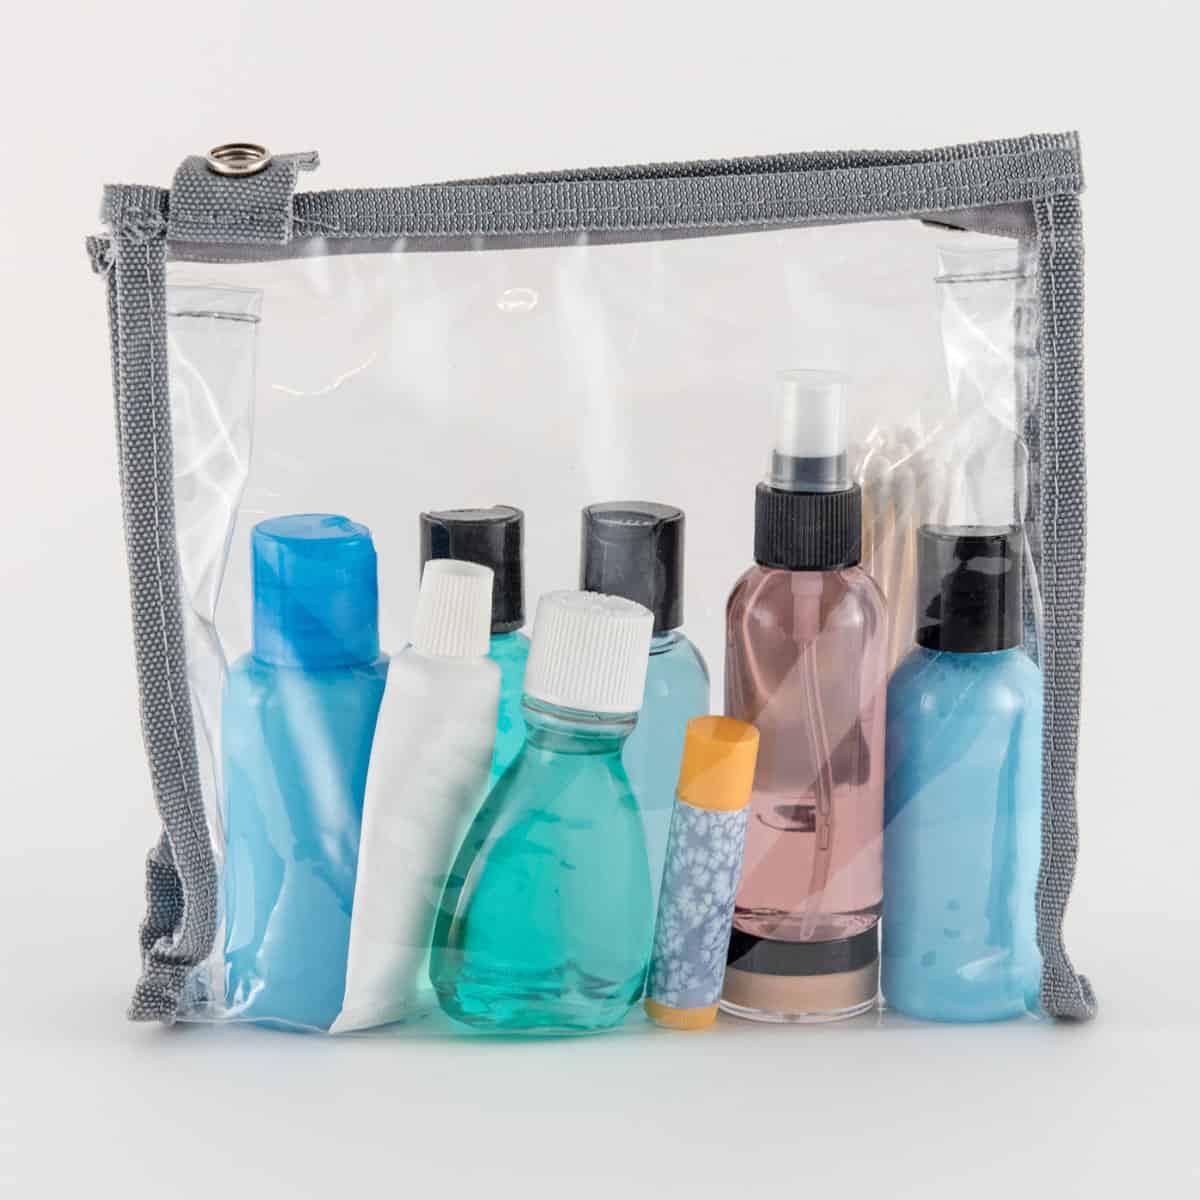 A small bag filled with cosmetic products on a white background